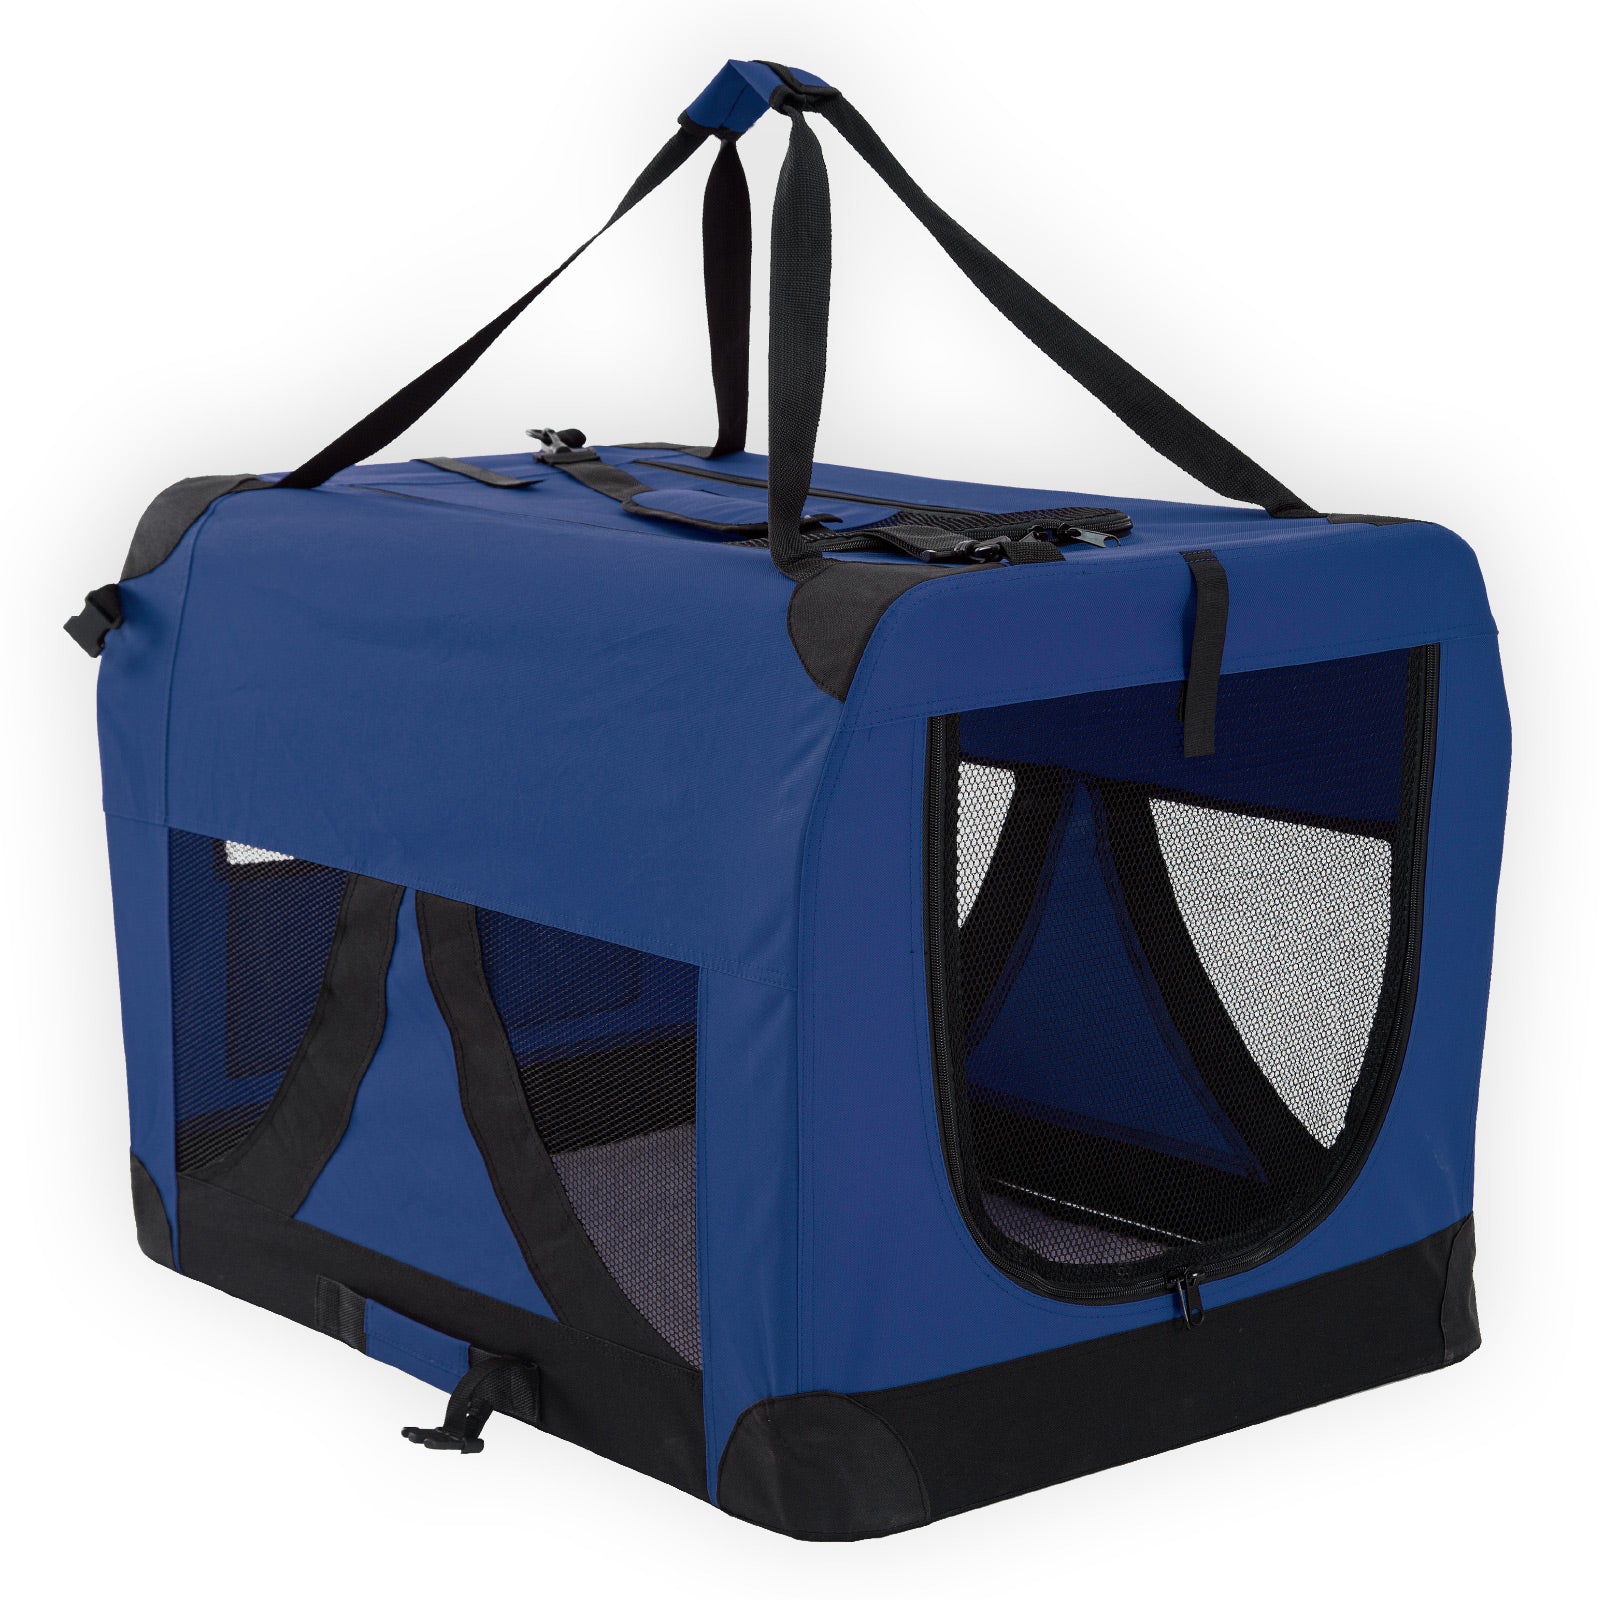 Paw Mate Blue Portable Soft Dog Cage Crate Carrier XXXL